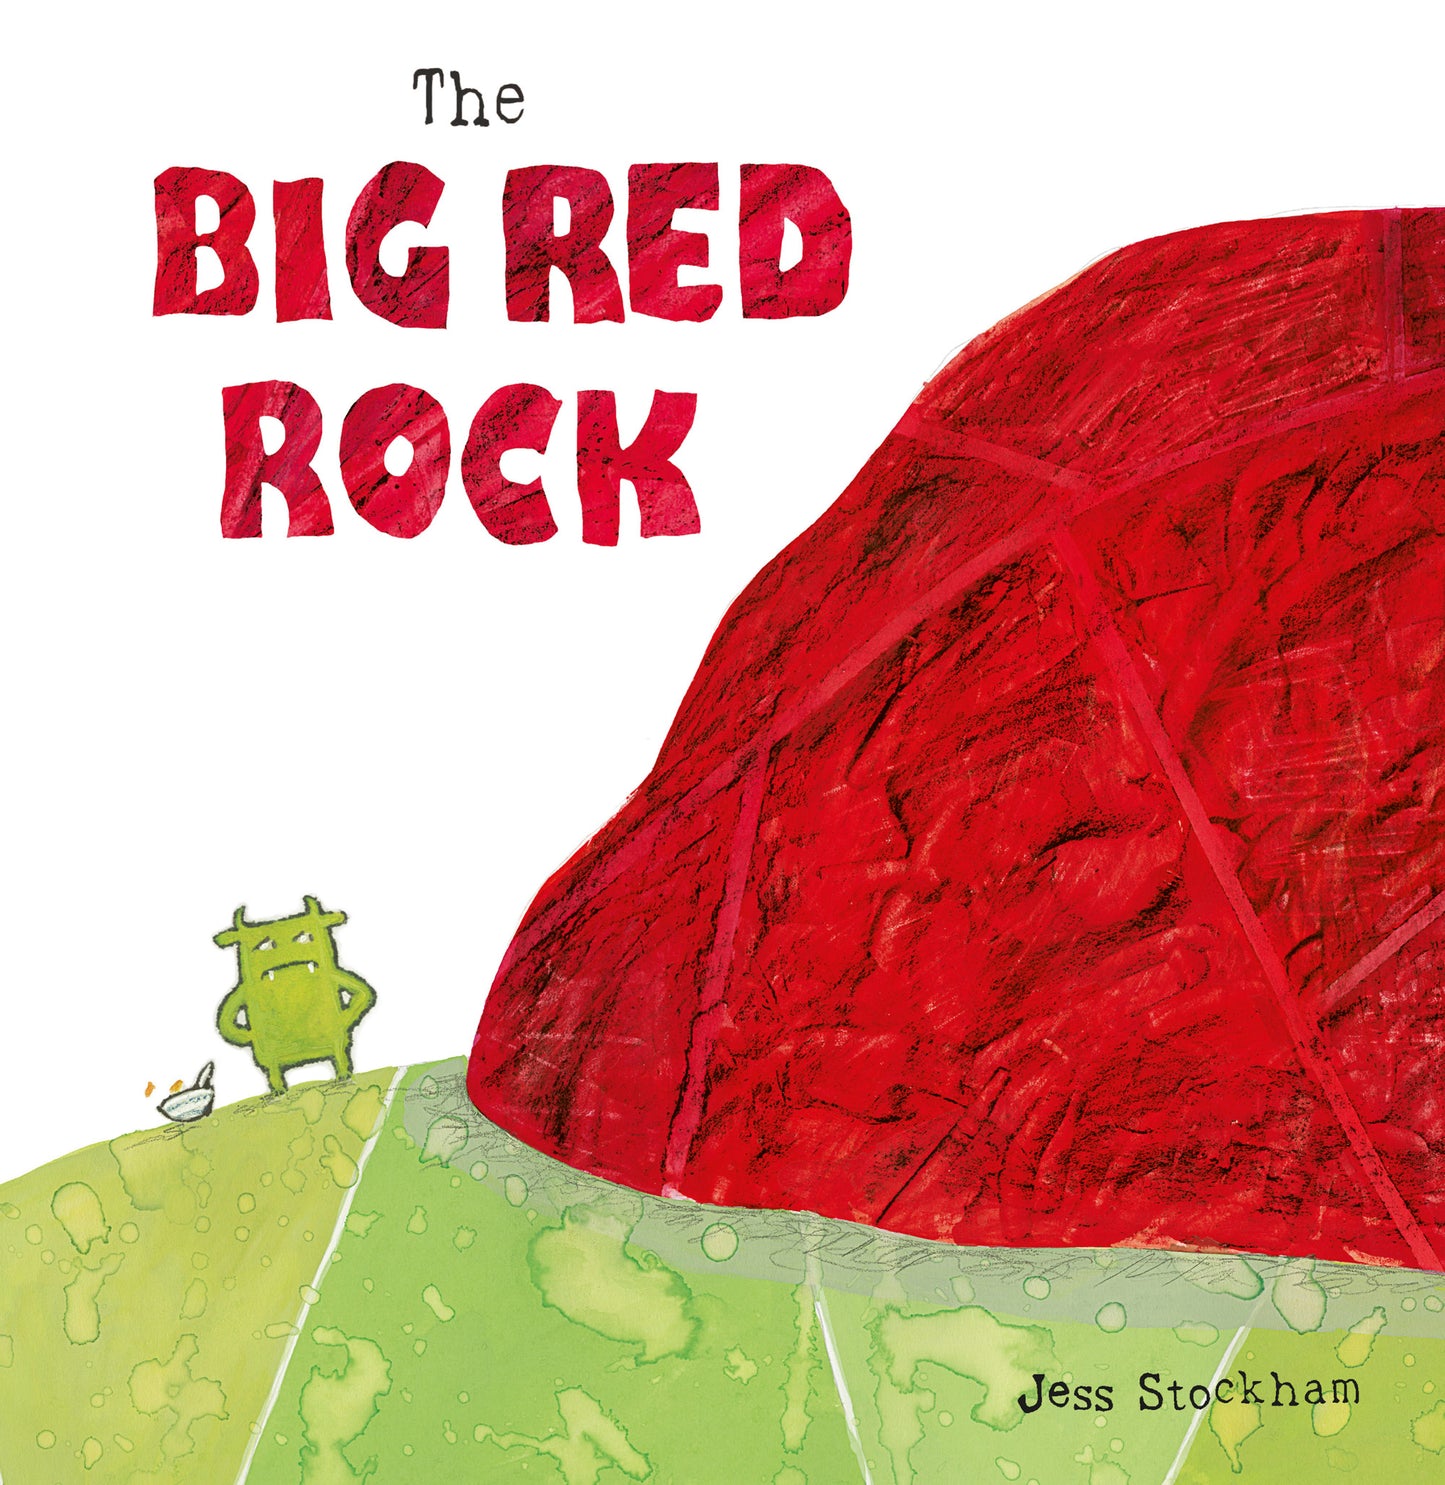 The Big Red Rock (Softcover Edition)